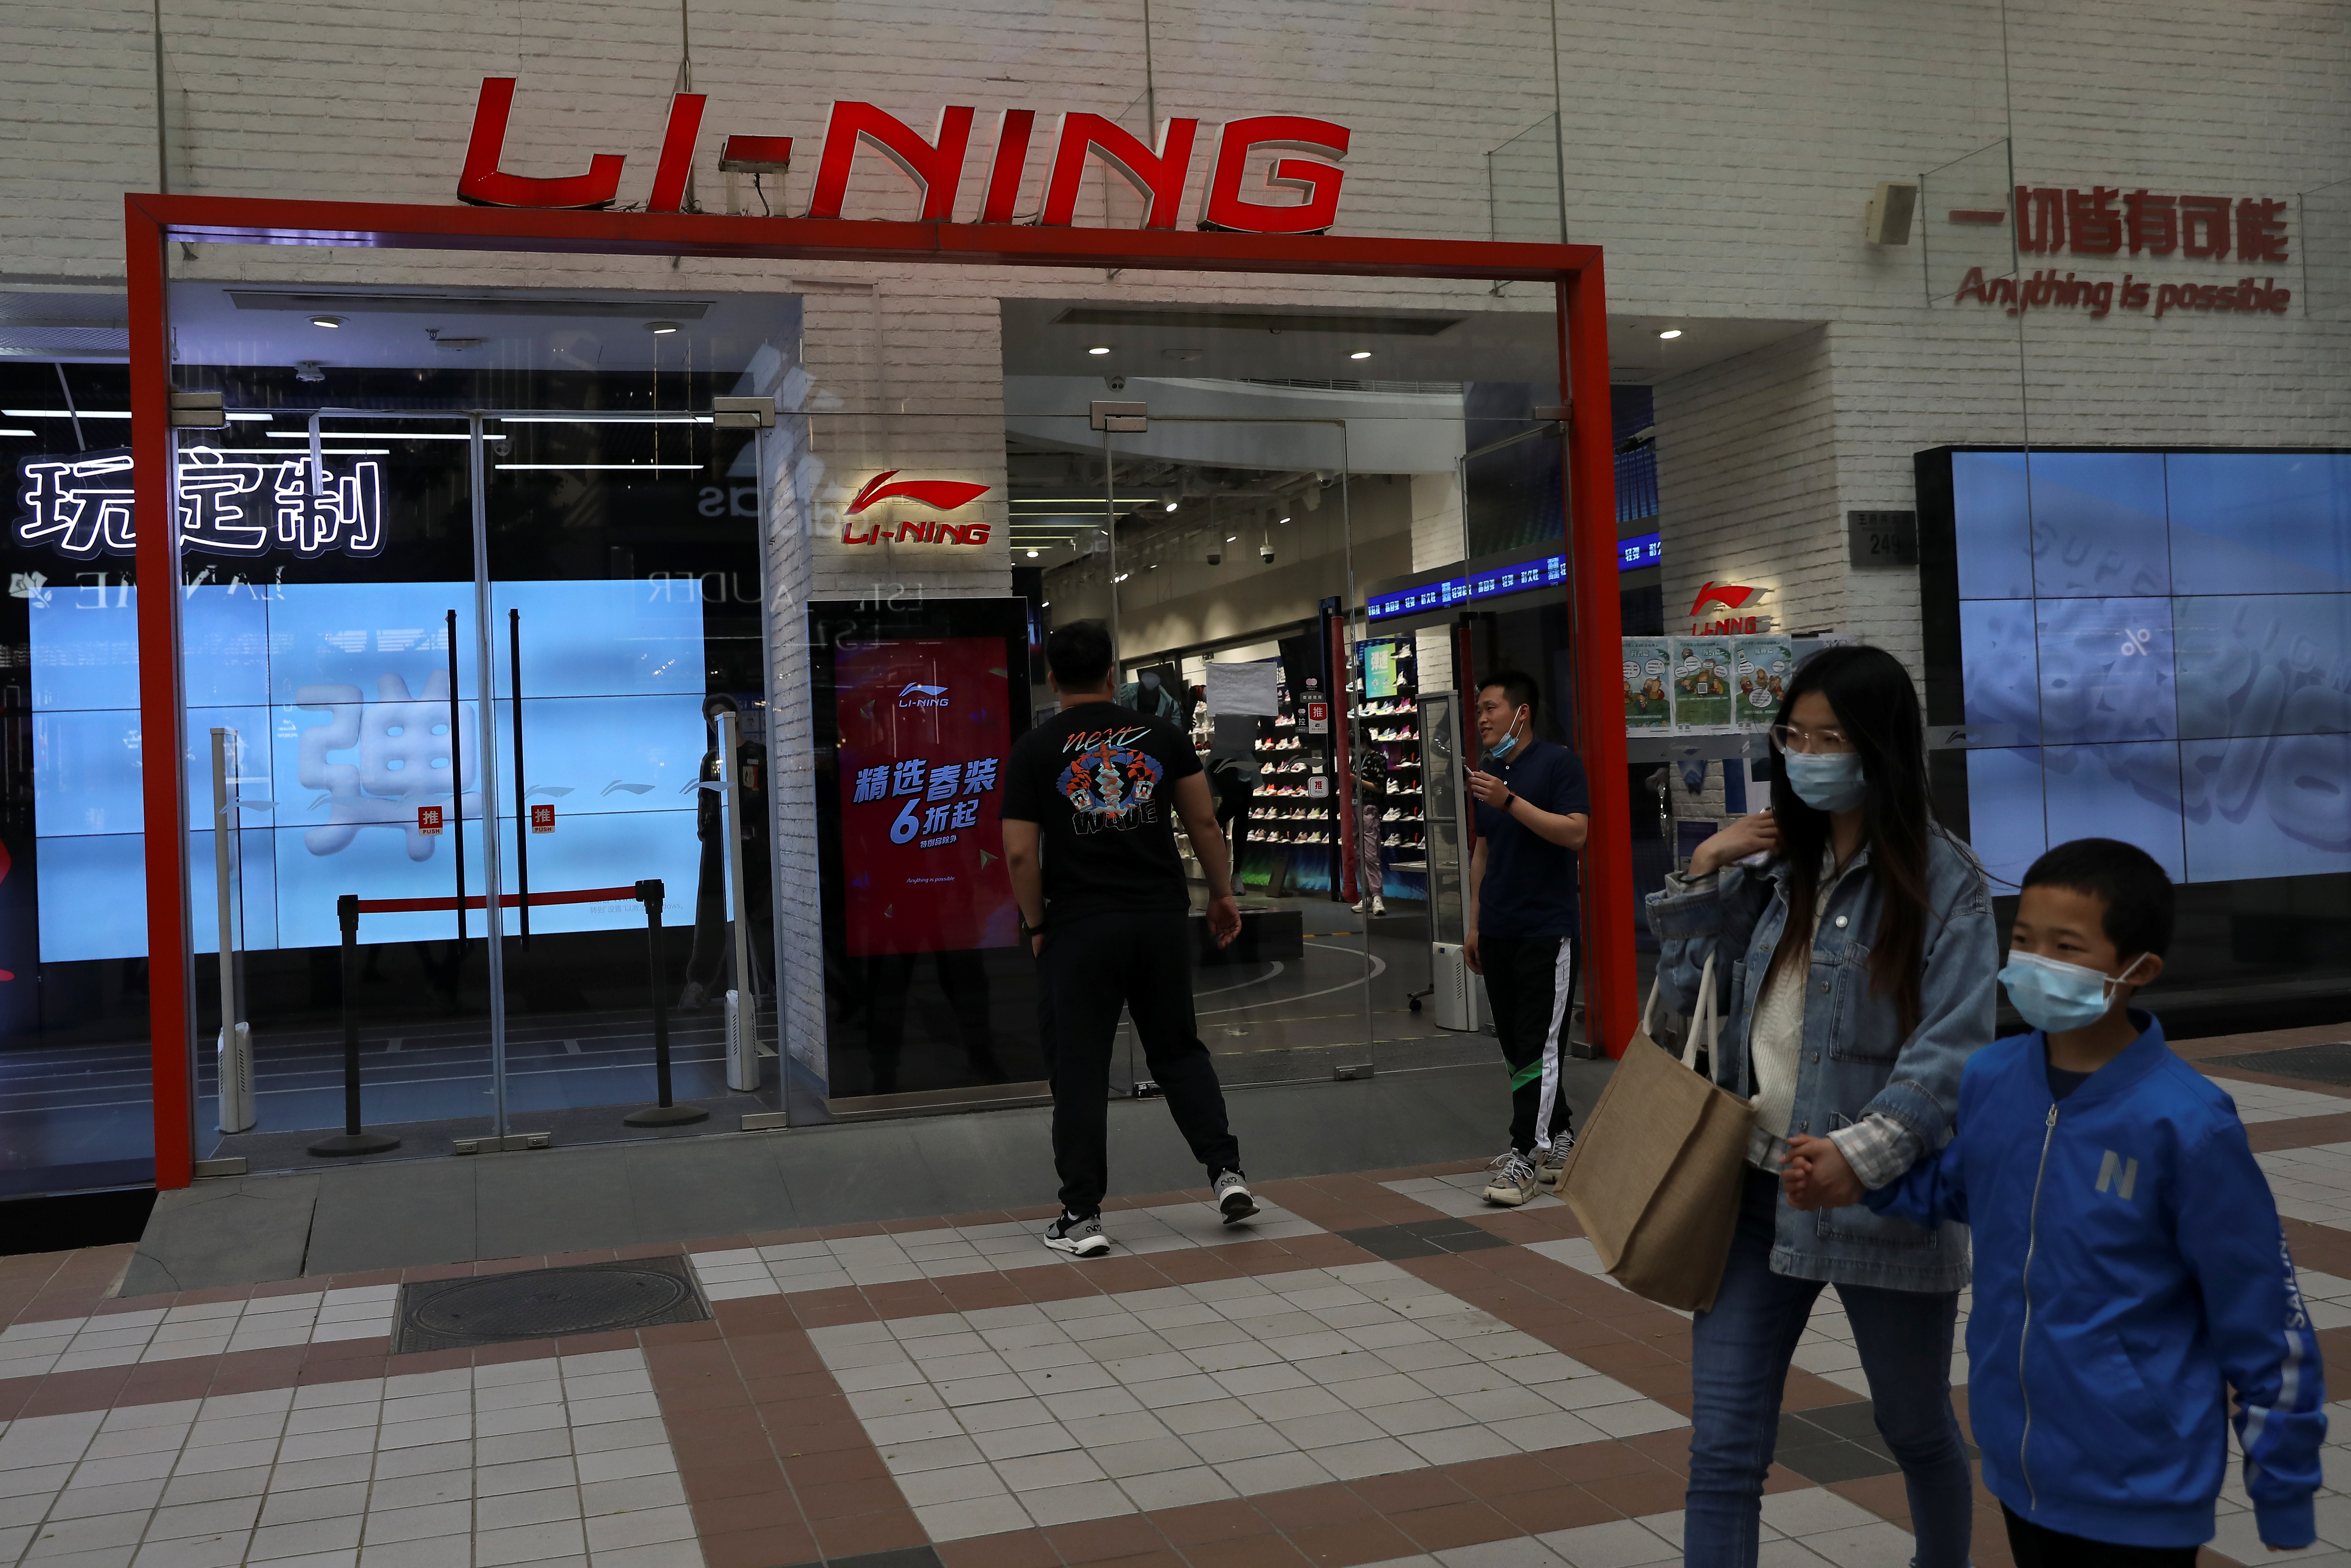 People walk past a store of Chinese sports products brand Li Ning in Beijing, China April 15, 2021. Picture taken April 15, 2021. REUTERS/Tingshu Wang